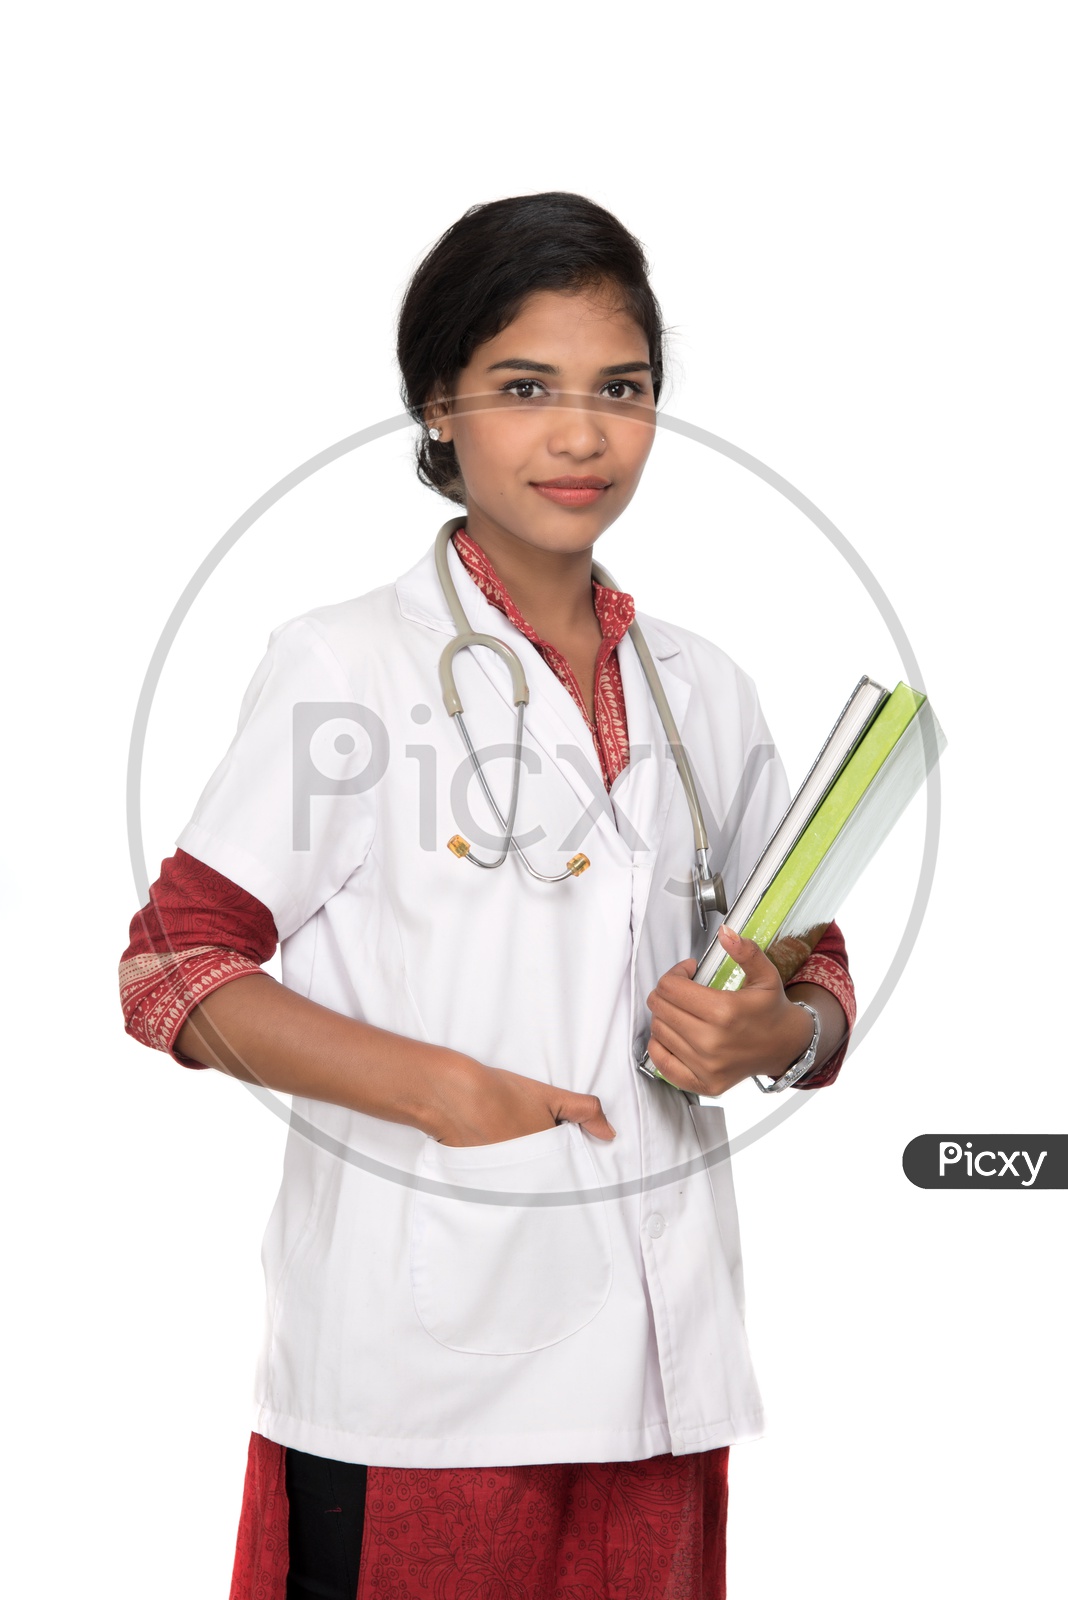 Young Lady Doctor With Stethoscope Over Neck And Holding Book In Hand On an Isolated White Background